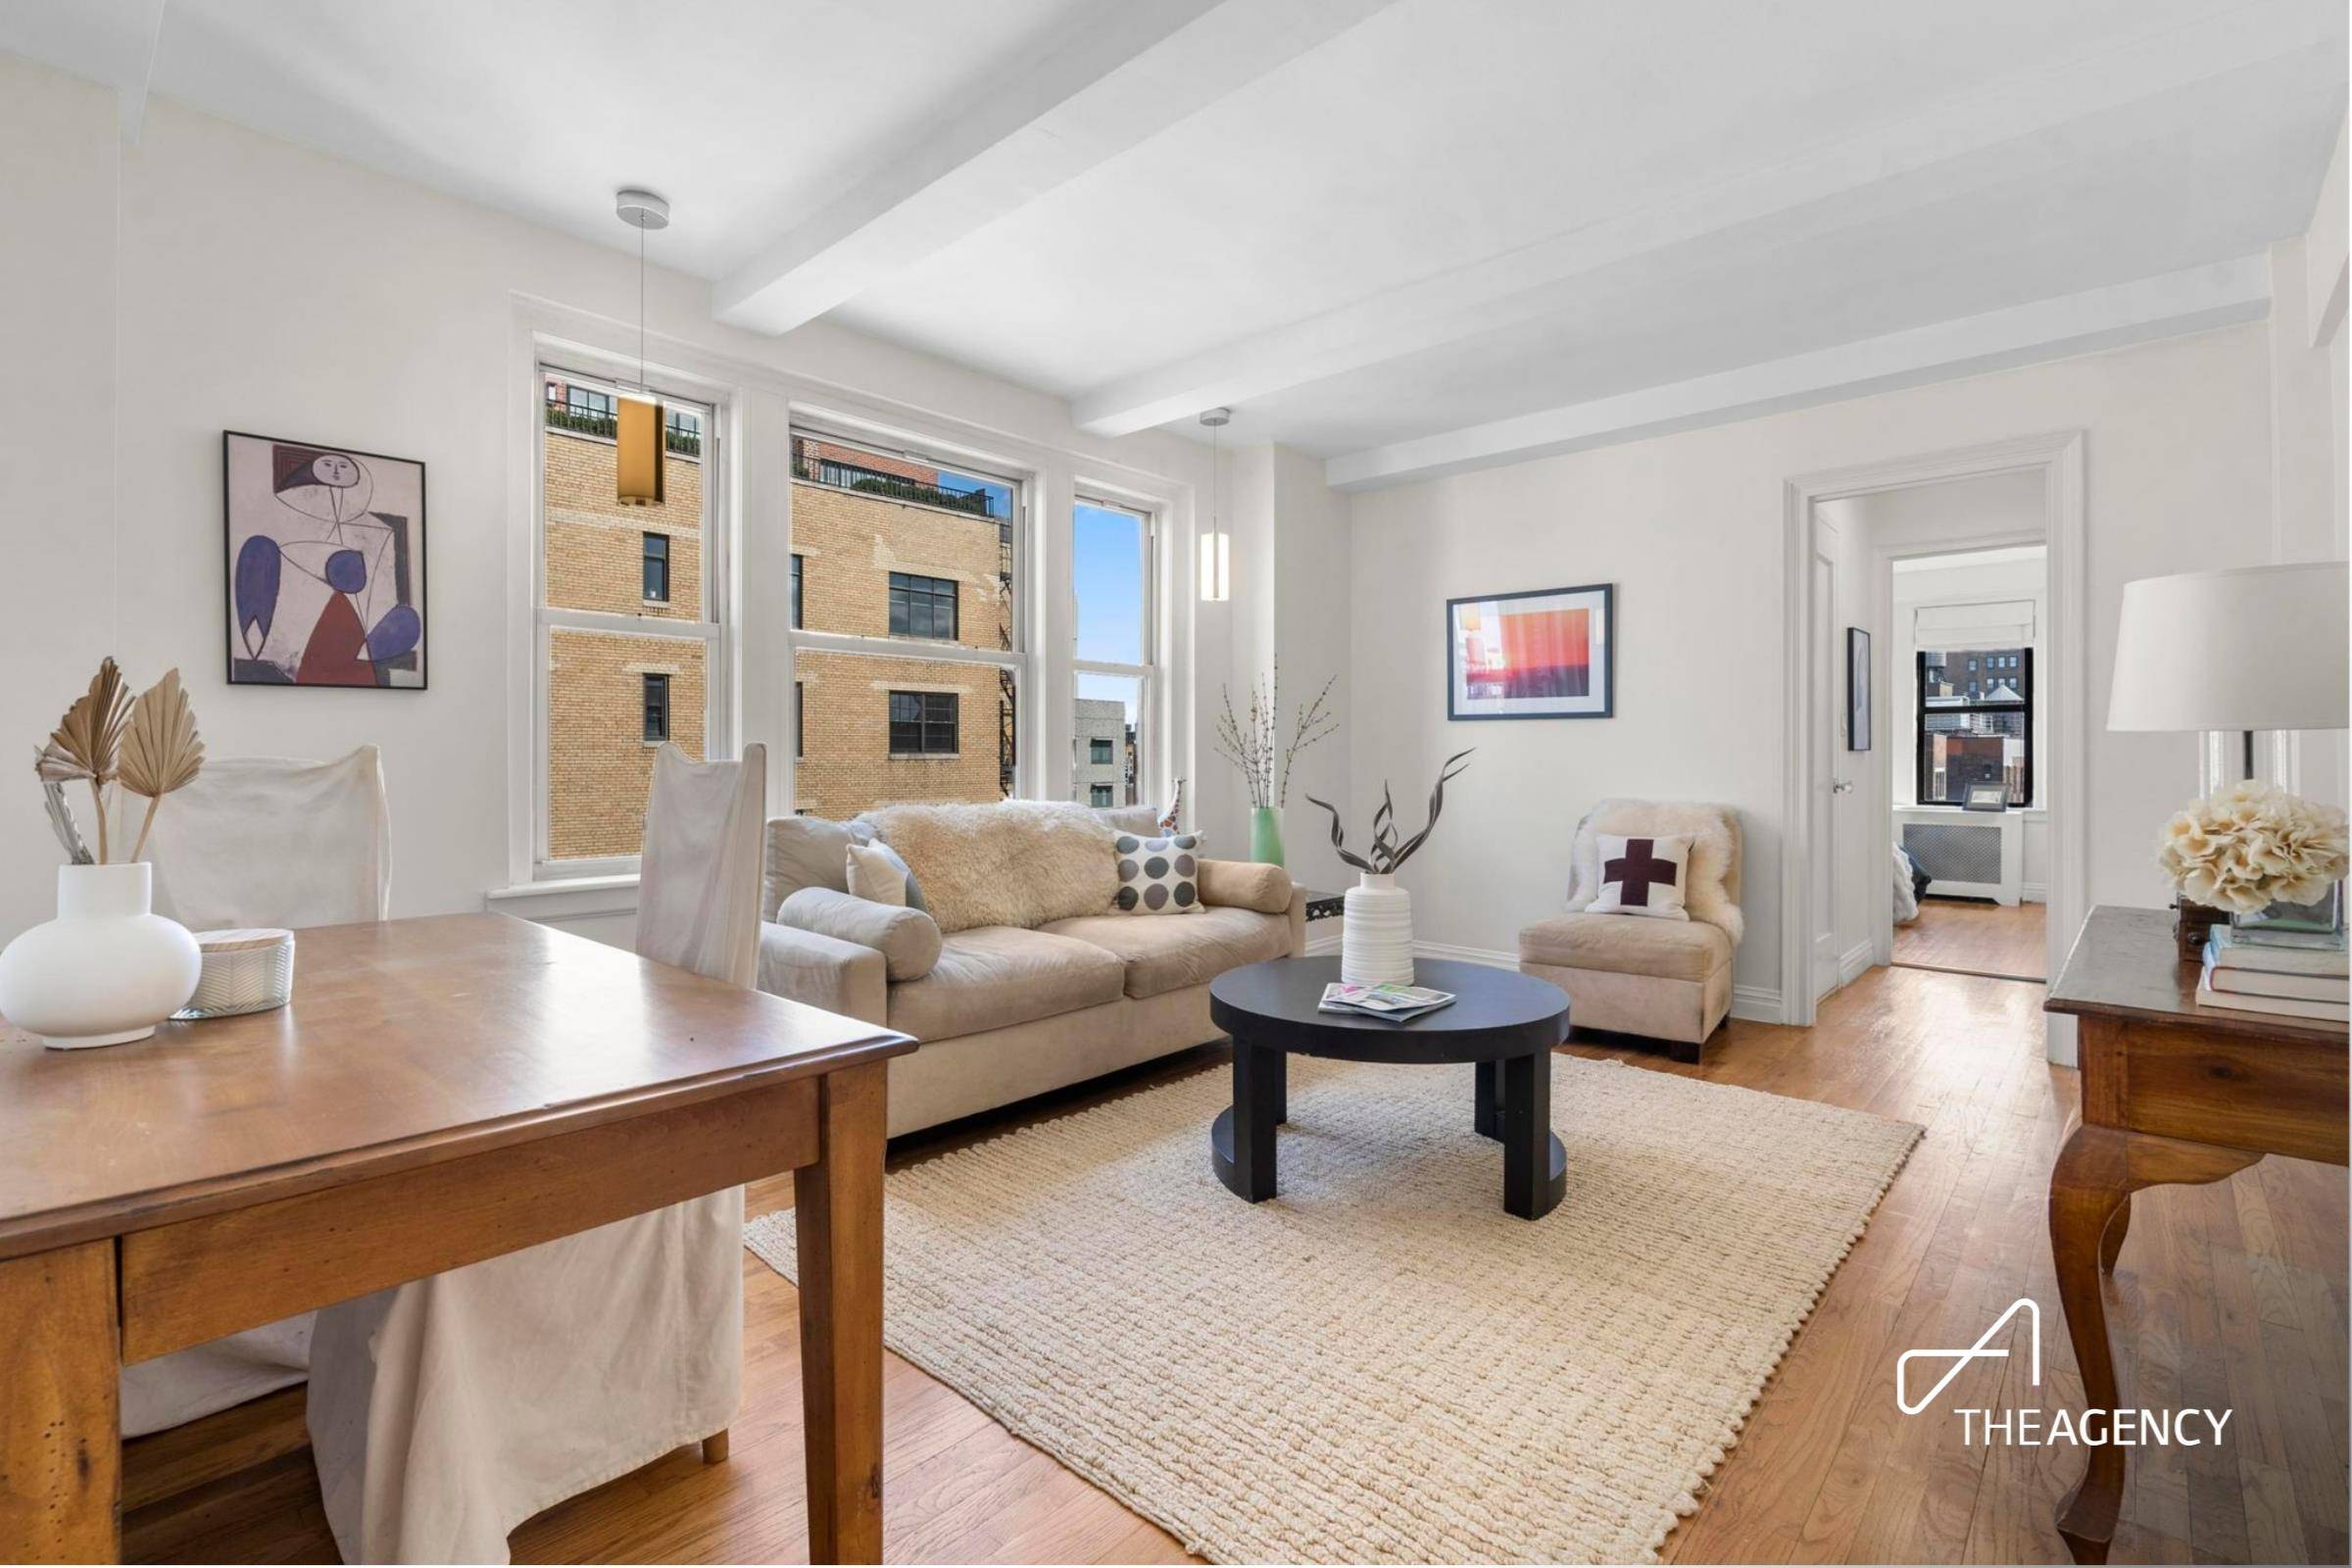 Bask in abundant natural light and serenity in this secure, one bedroom haven perched high above the vibrant Gold Coast of Greenwich Village.